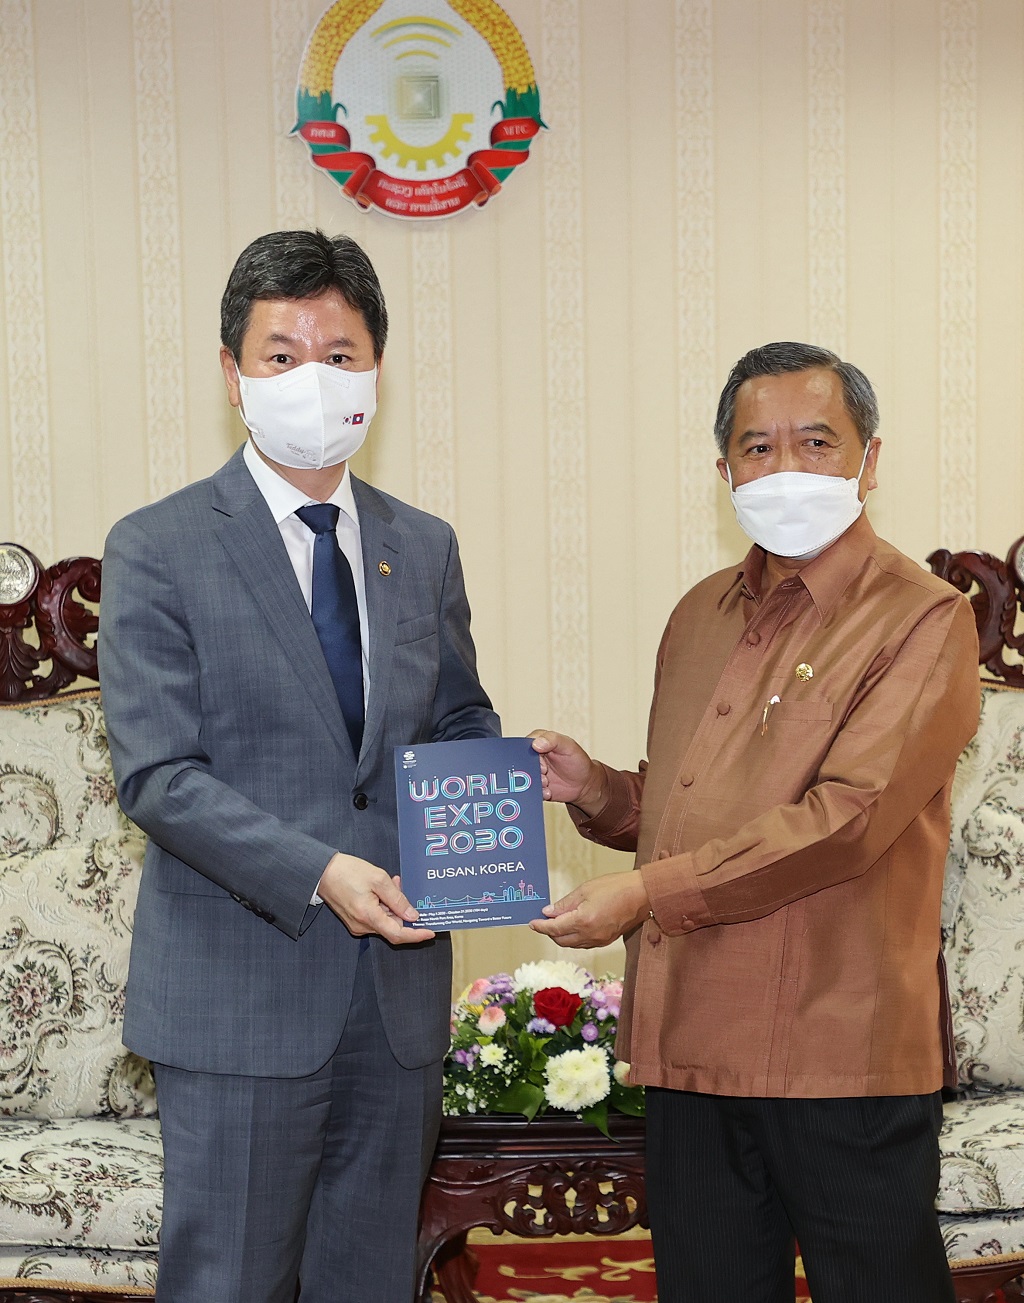 Vice Minitser Han asked Minister Boviengkham Vongdara for support for Korea’s bid to 2030 Busan Expo at the bilateral meeting on 2nd September.